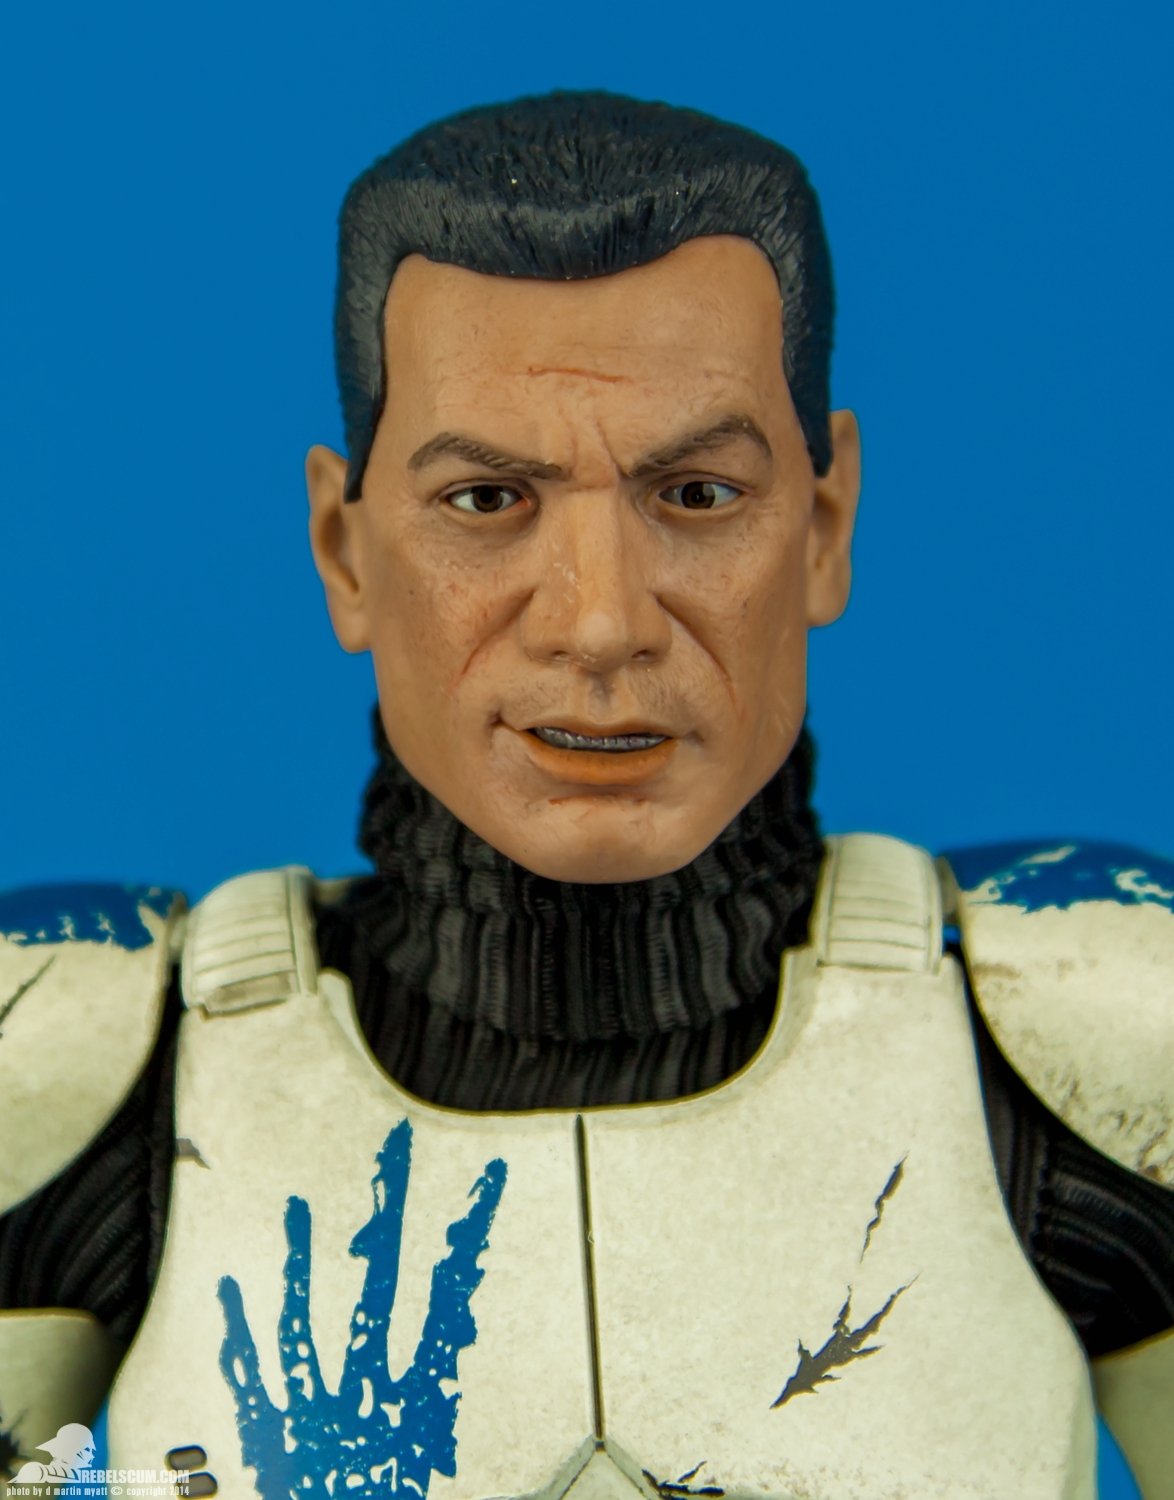 Echo-and-Fives-501st-Legion-Sixth-Scale-Sideshow-Collectibles-029.jpg